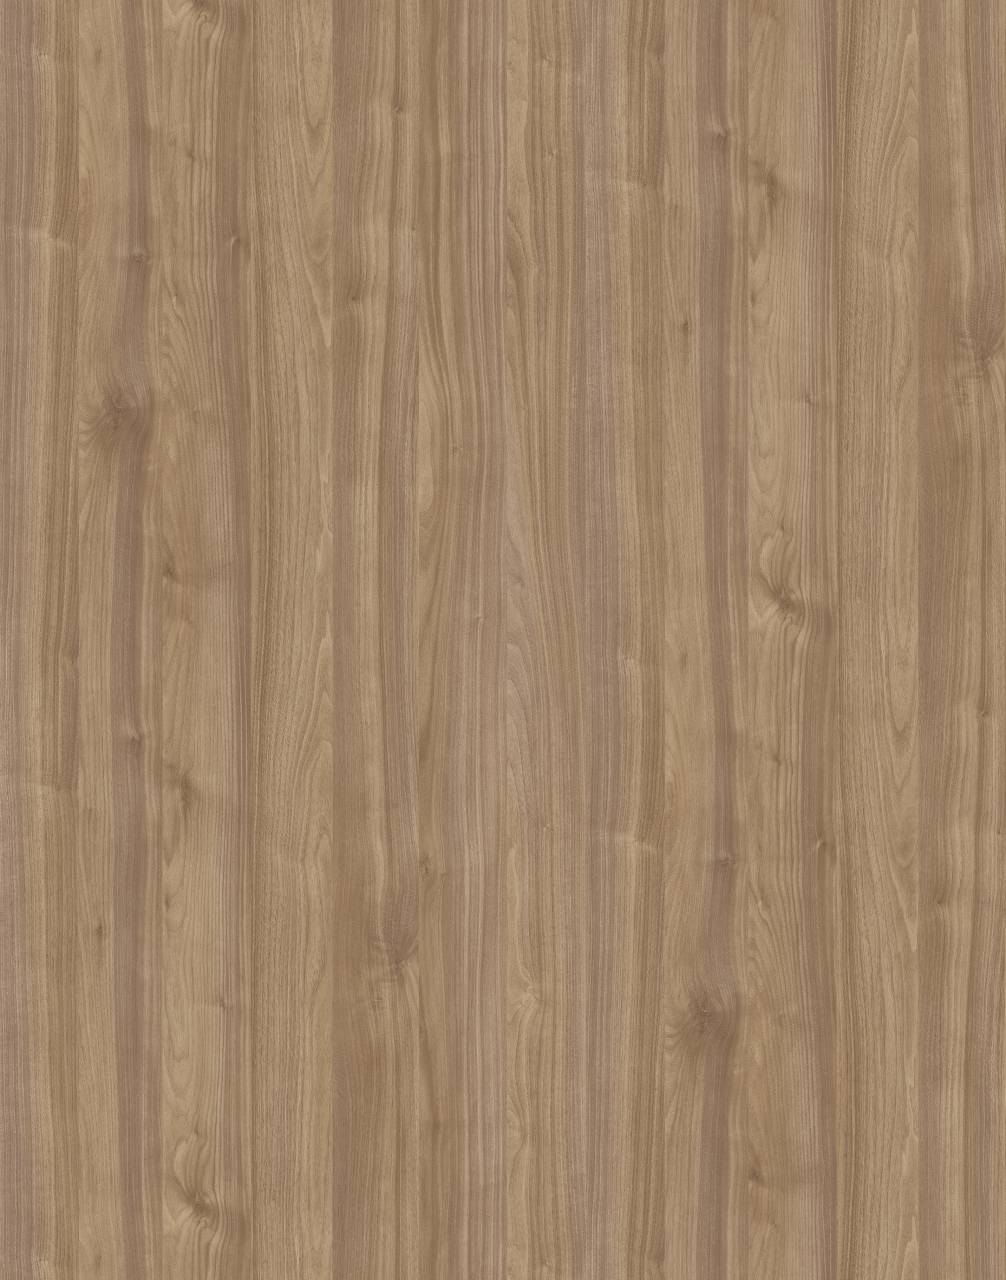 Light Select Walnuts PW HPL with smooth surface and warm golden brown tones for a natural and inviting look.